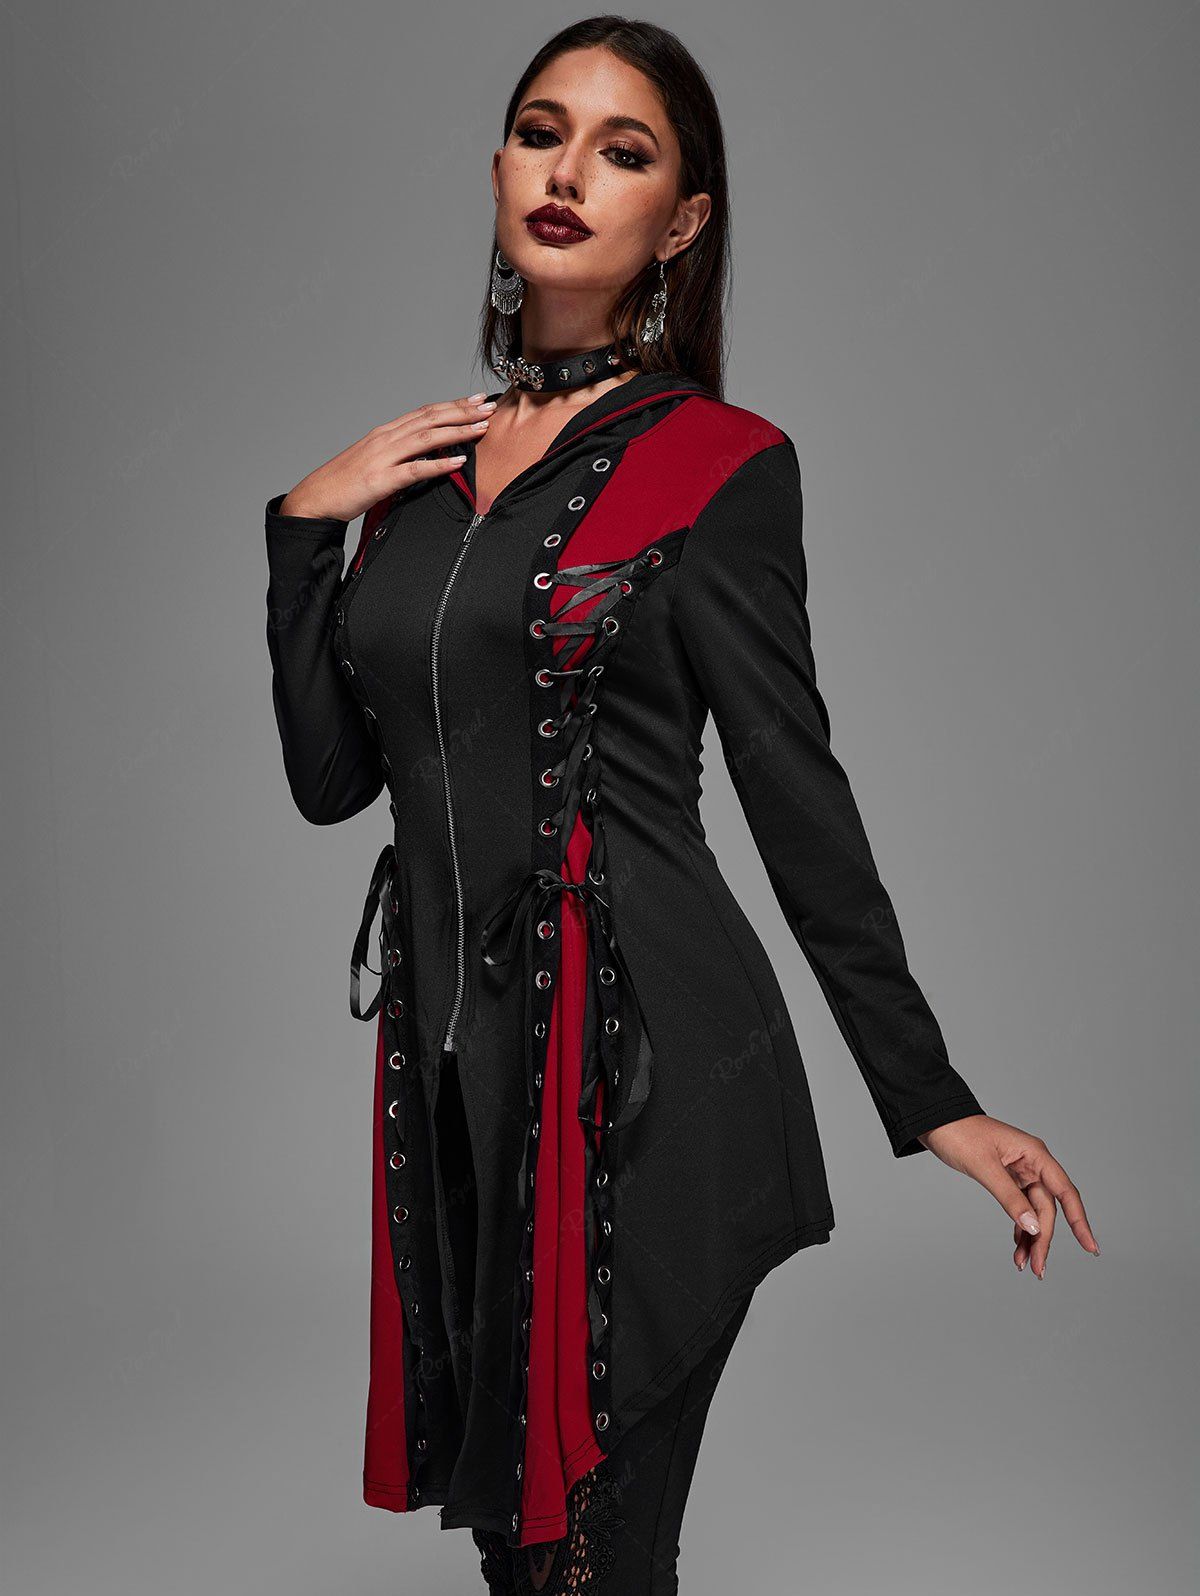 💗Chiara Loves💗 Hooded Lace Up Grommets Colorblock Gothic Coat